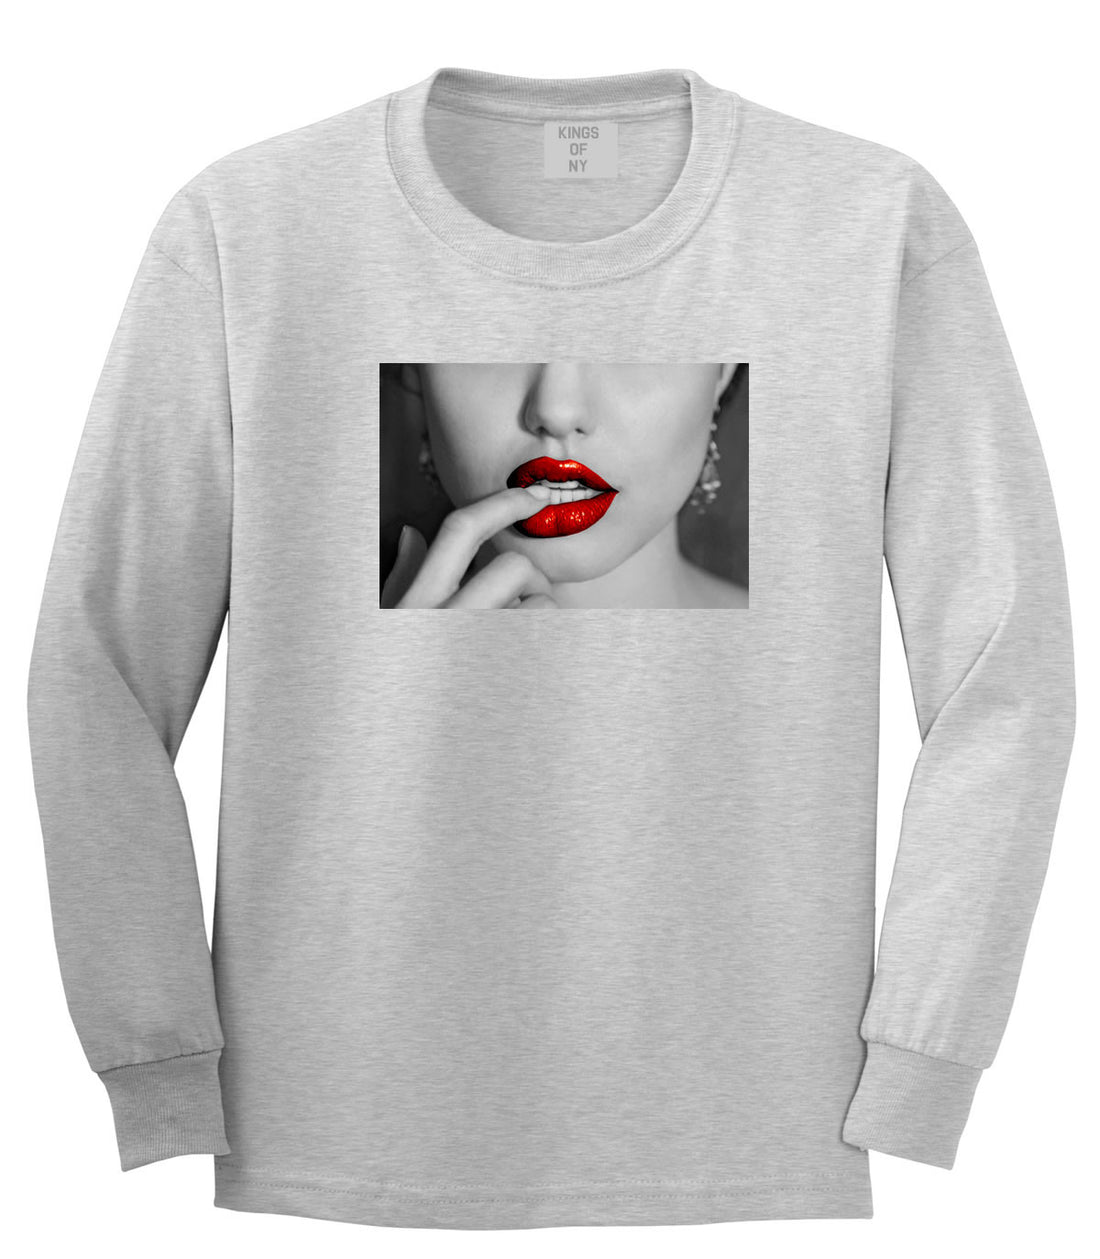  Angelina Red by Kings Of NY Lips Jolie Sexy Hot Picture Long Sleeve T-Shirt In Grey by Kings Of NY